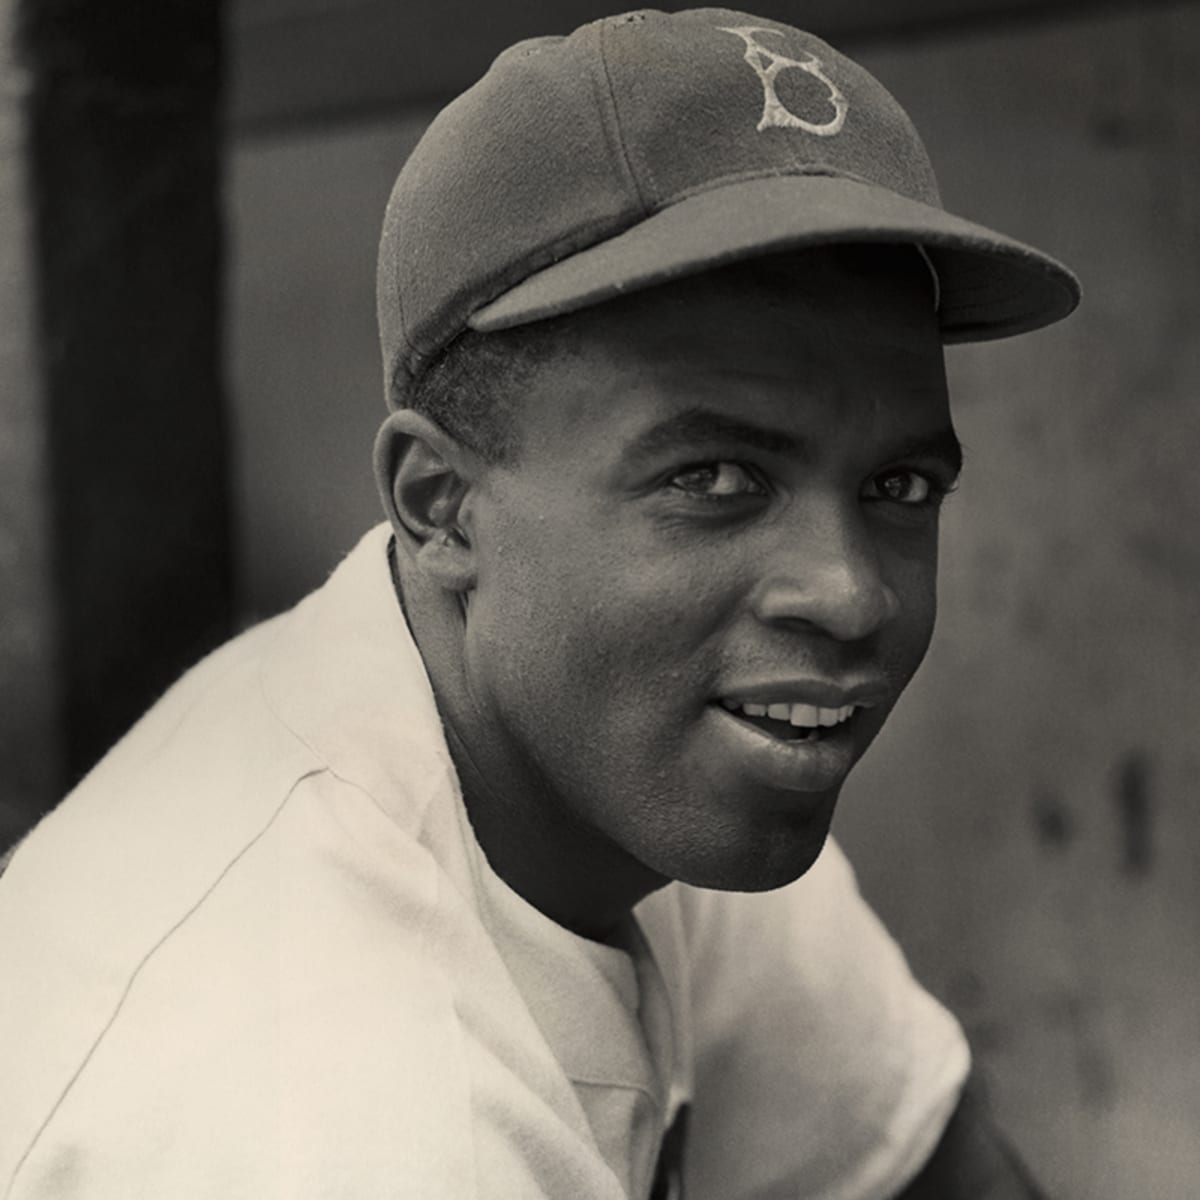 April 15 is Jackie Robinson Day, celebrating the man whose courage